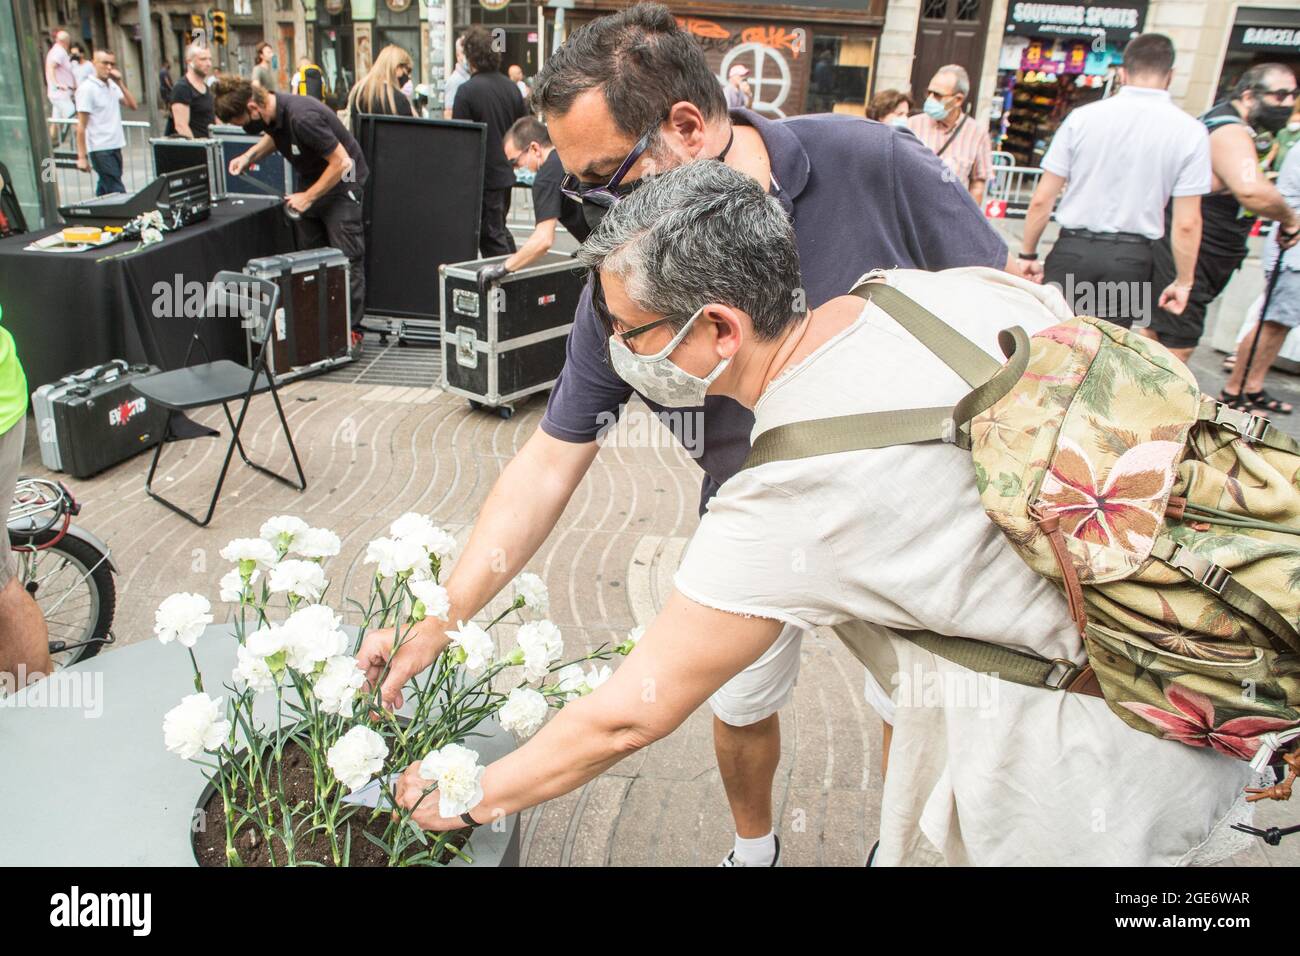 Barcelona, Catalonia, Spain. 17th Aug, 2021. People are seen laying flowers at the victims of the Las Ramblas attack in Barcelona.Barcelona pays tribute to the victims on the fourth anniversary of the jihadist attack on La Rambla where on August 17, 2017, a van carried out the massive outrage, which caused the death of 15 people.The families of the victims have been the protagonists of the ceremony, depositing white carnations and bouquets of flowers in three cylinders. This was followed by the authorities, with the mayor of Barcelona, Ada Colau, the president of the Generalitat of Cataloni Stock Photo